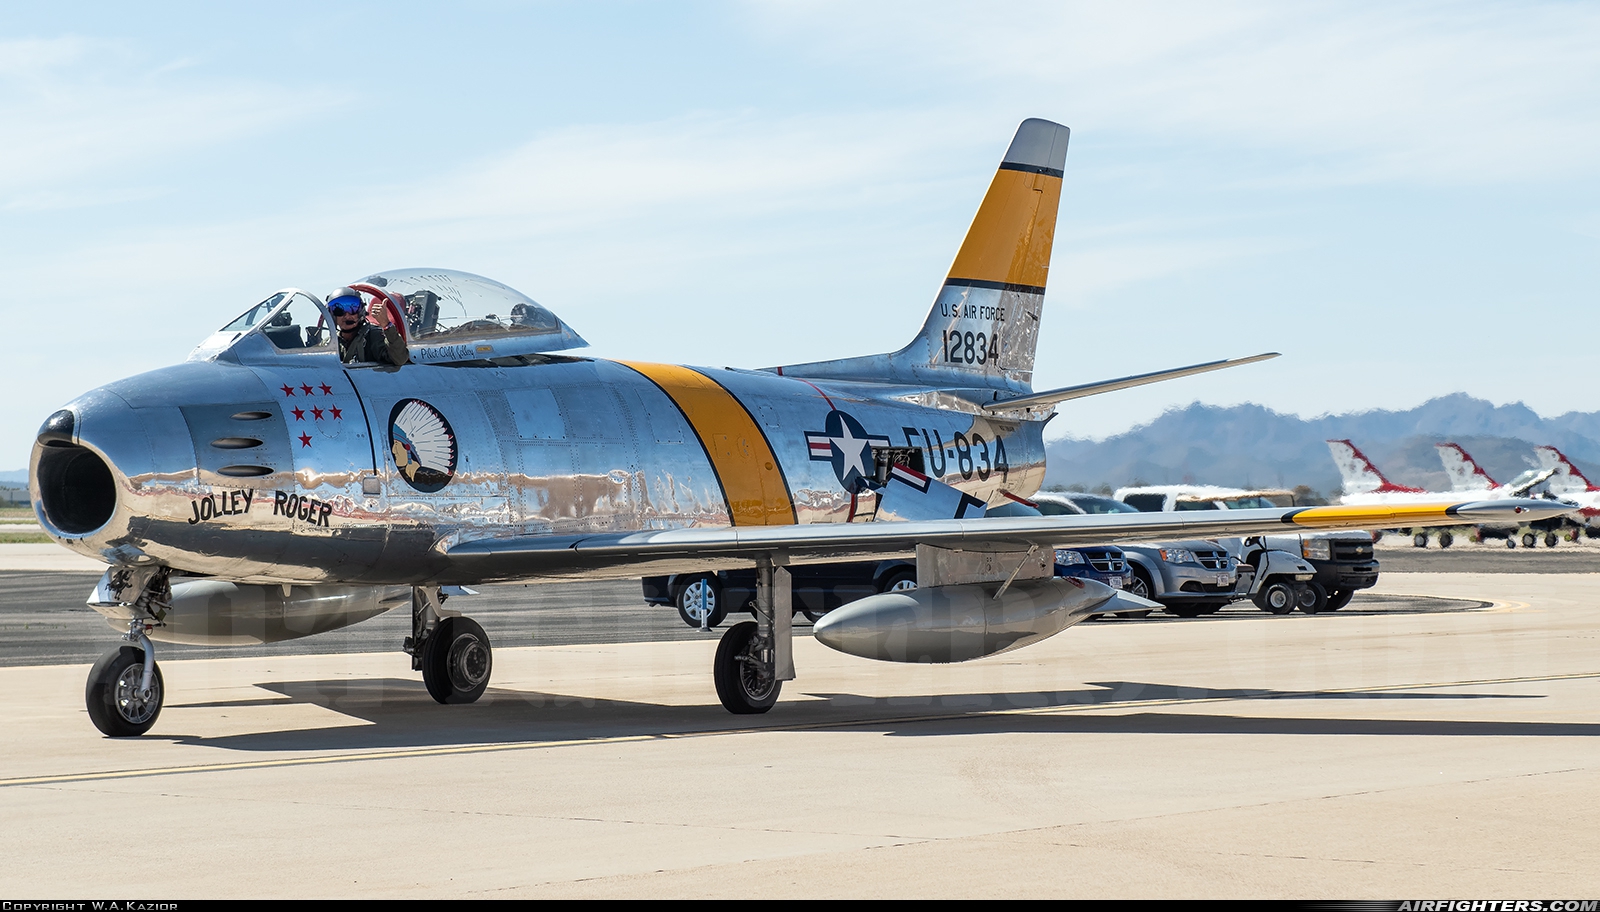 Private - Planes of Fame Air Museum North American F-86F Sabre NX186AM at Tucson - Davis-Monthan AFB (DMA / KDMA), USA